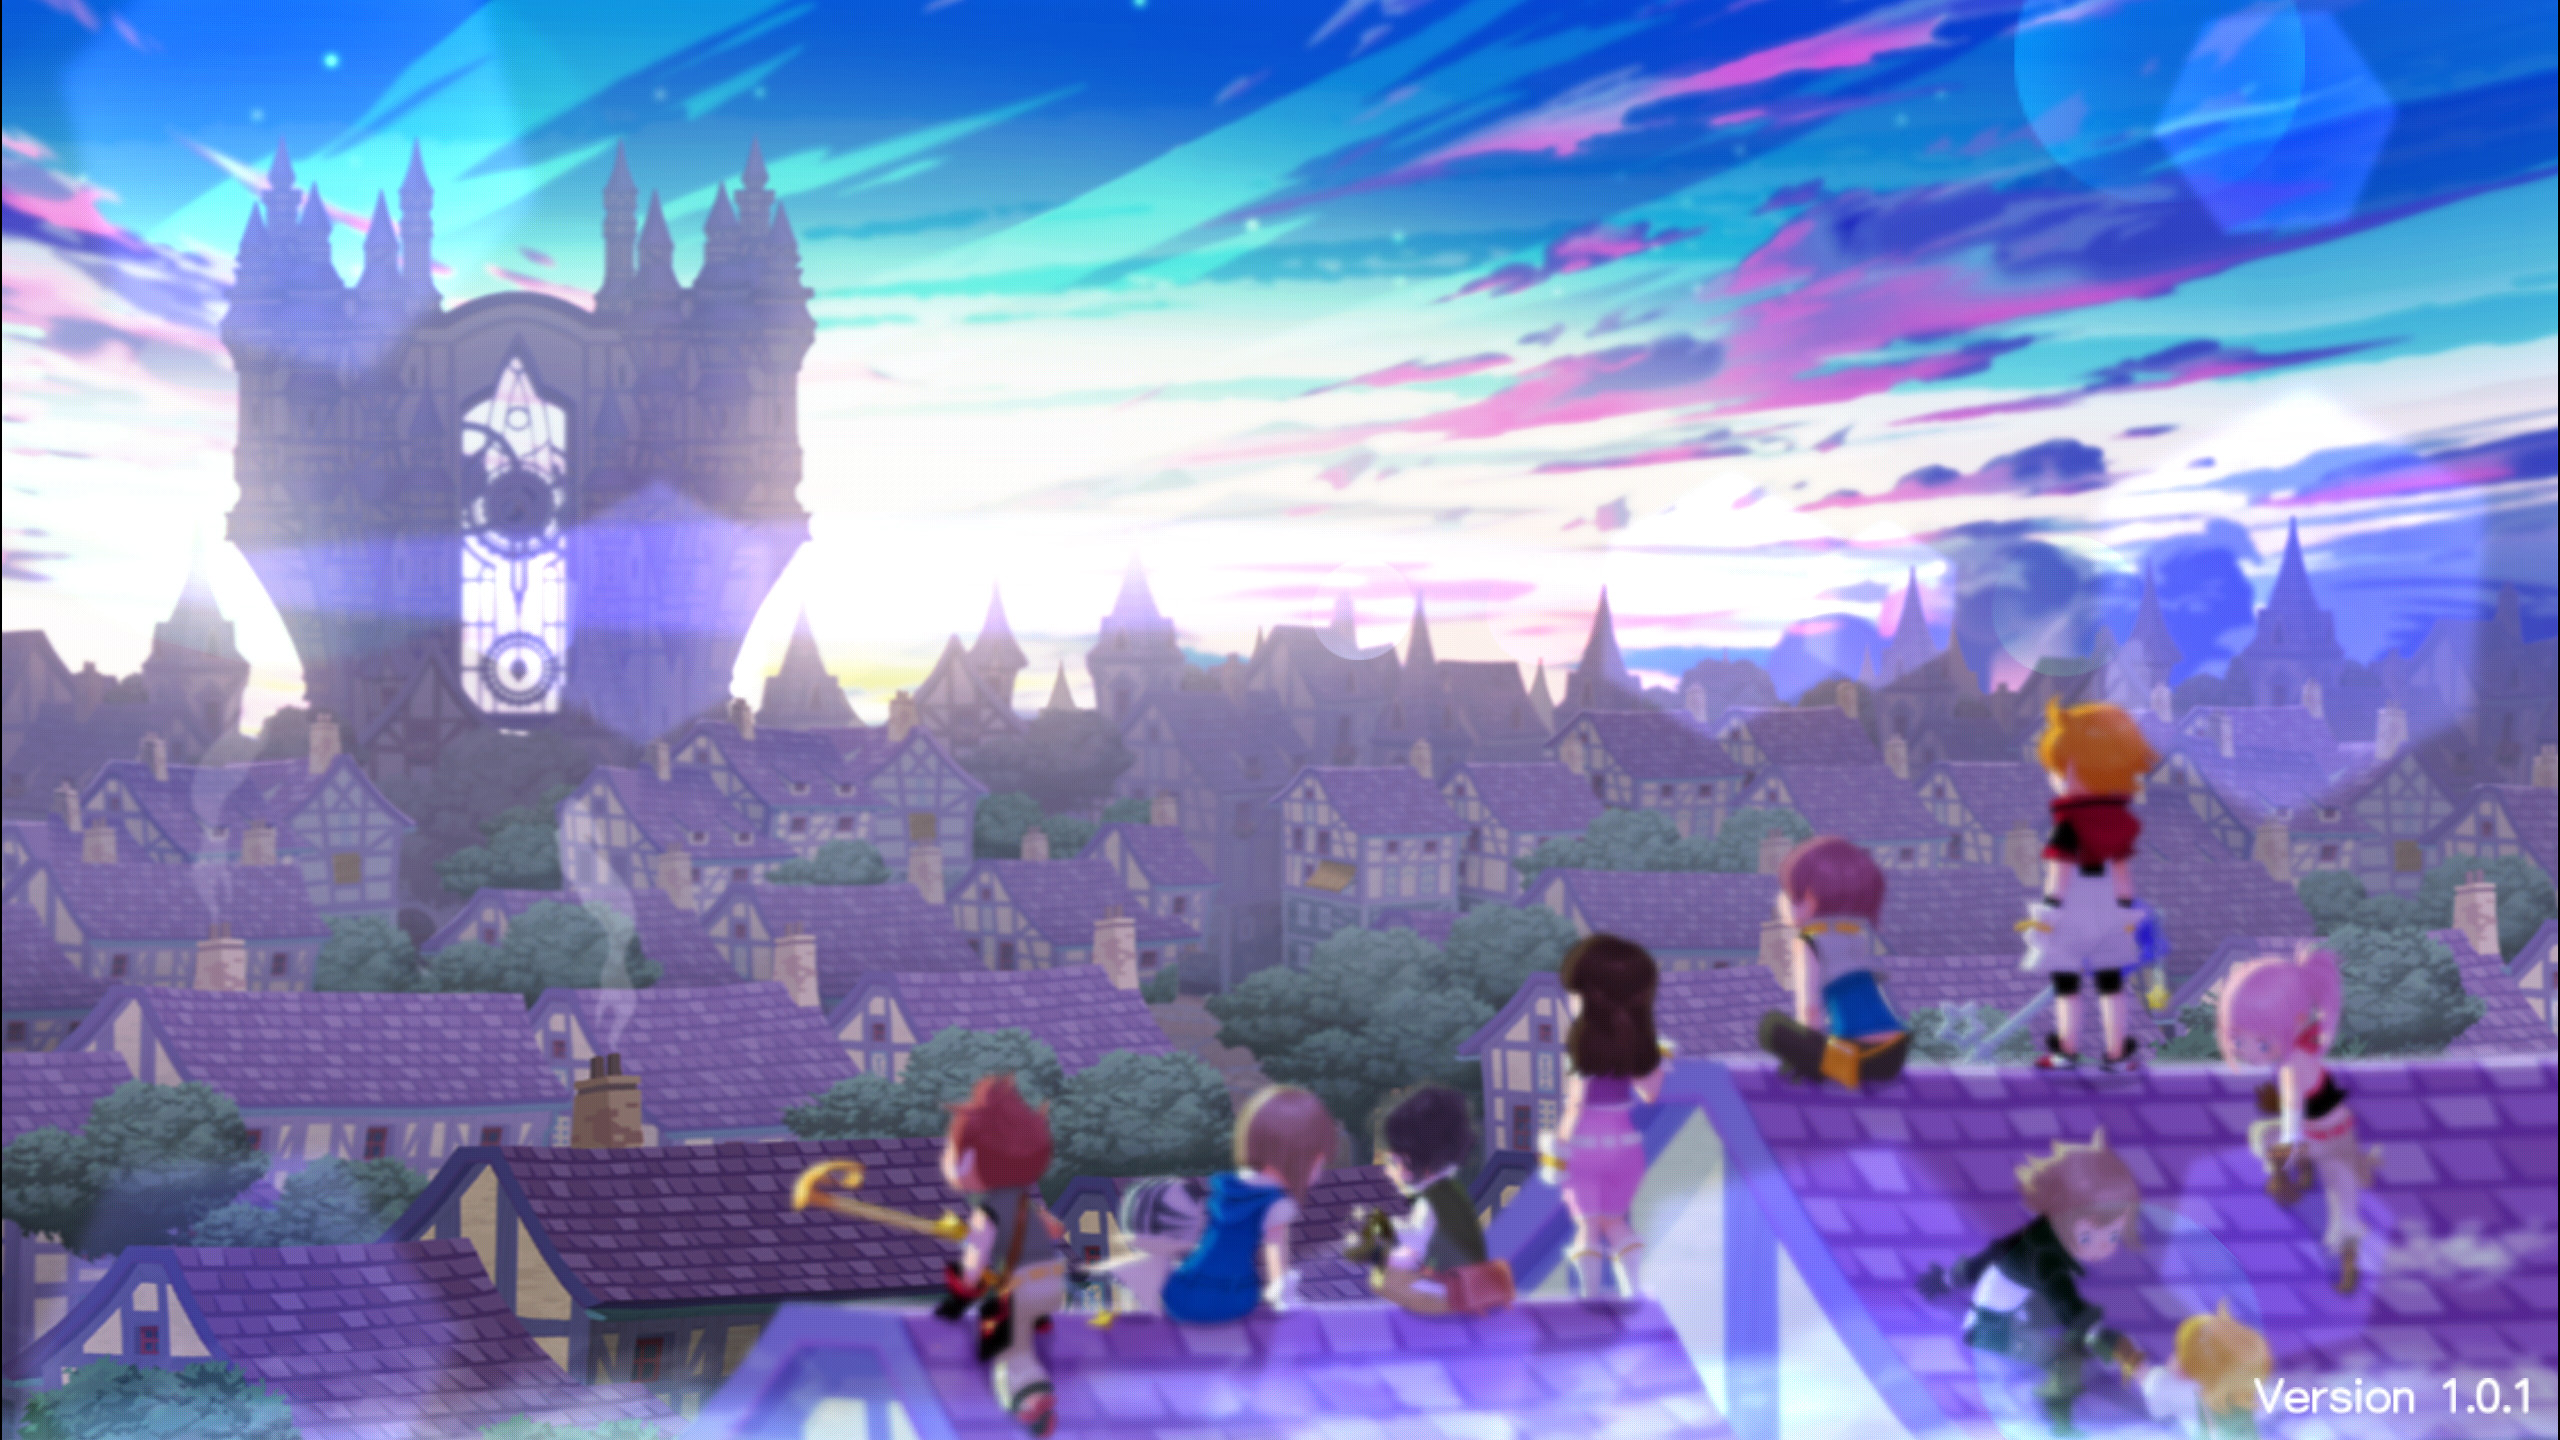 2560x1440 The wait is finally over for Kingdom Hearts fans with the release of Kingdom  Hearts Unchained X. This game gives the user the ability to create an  avatar in ...